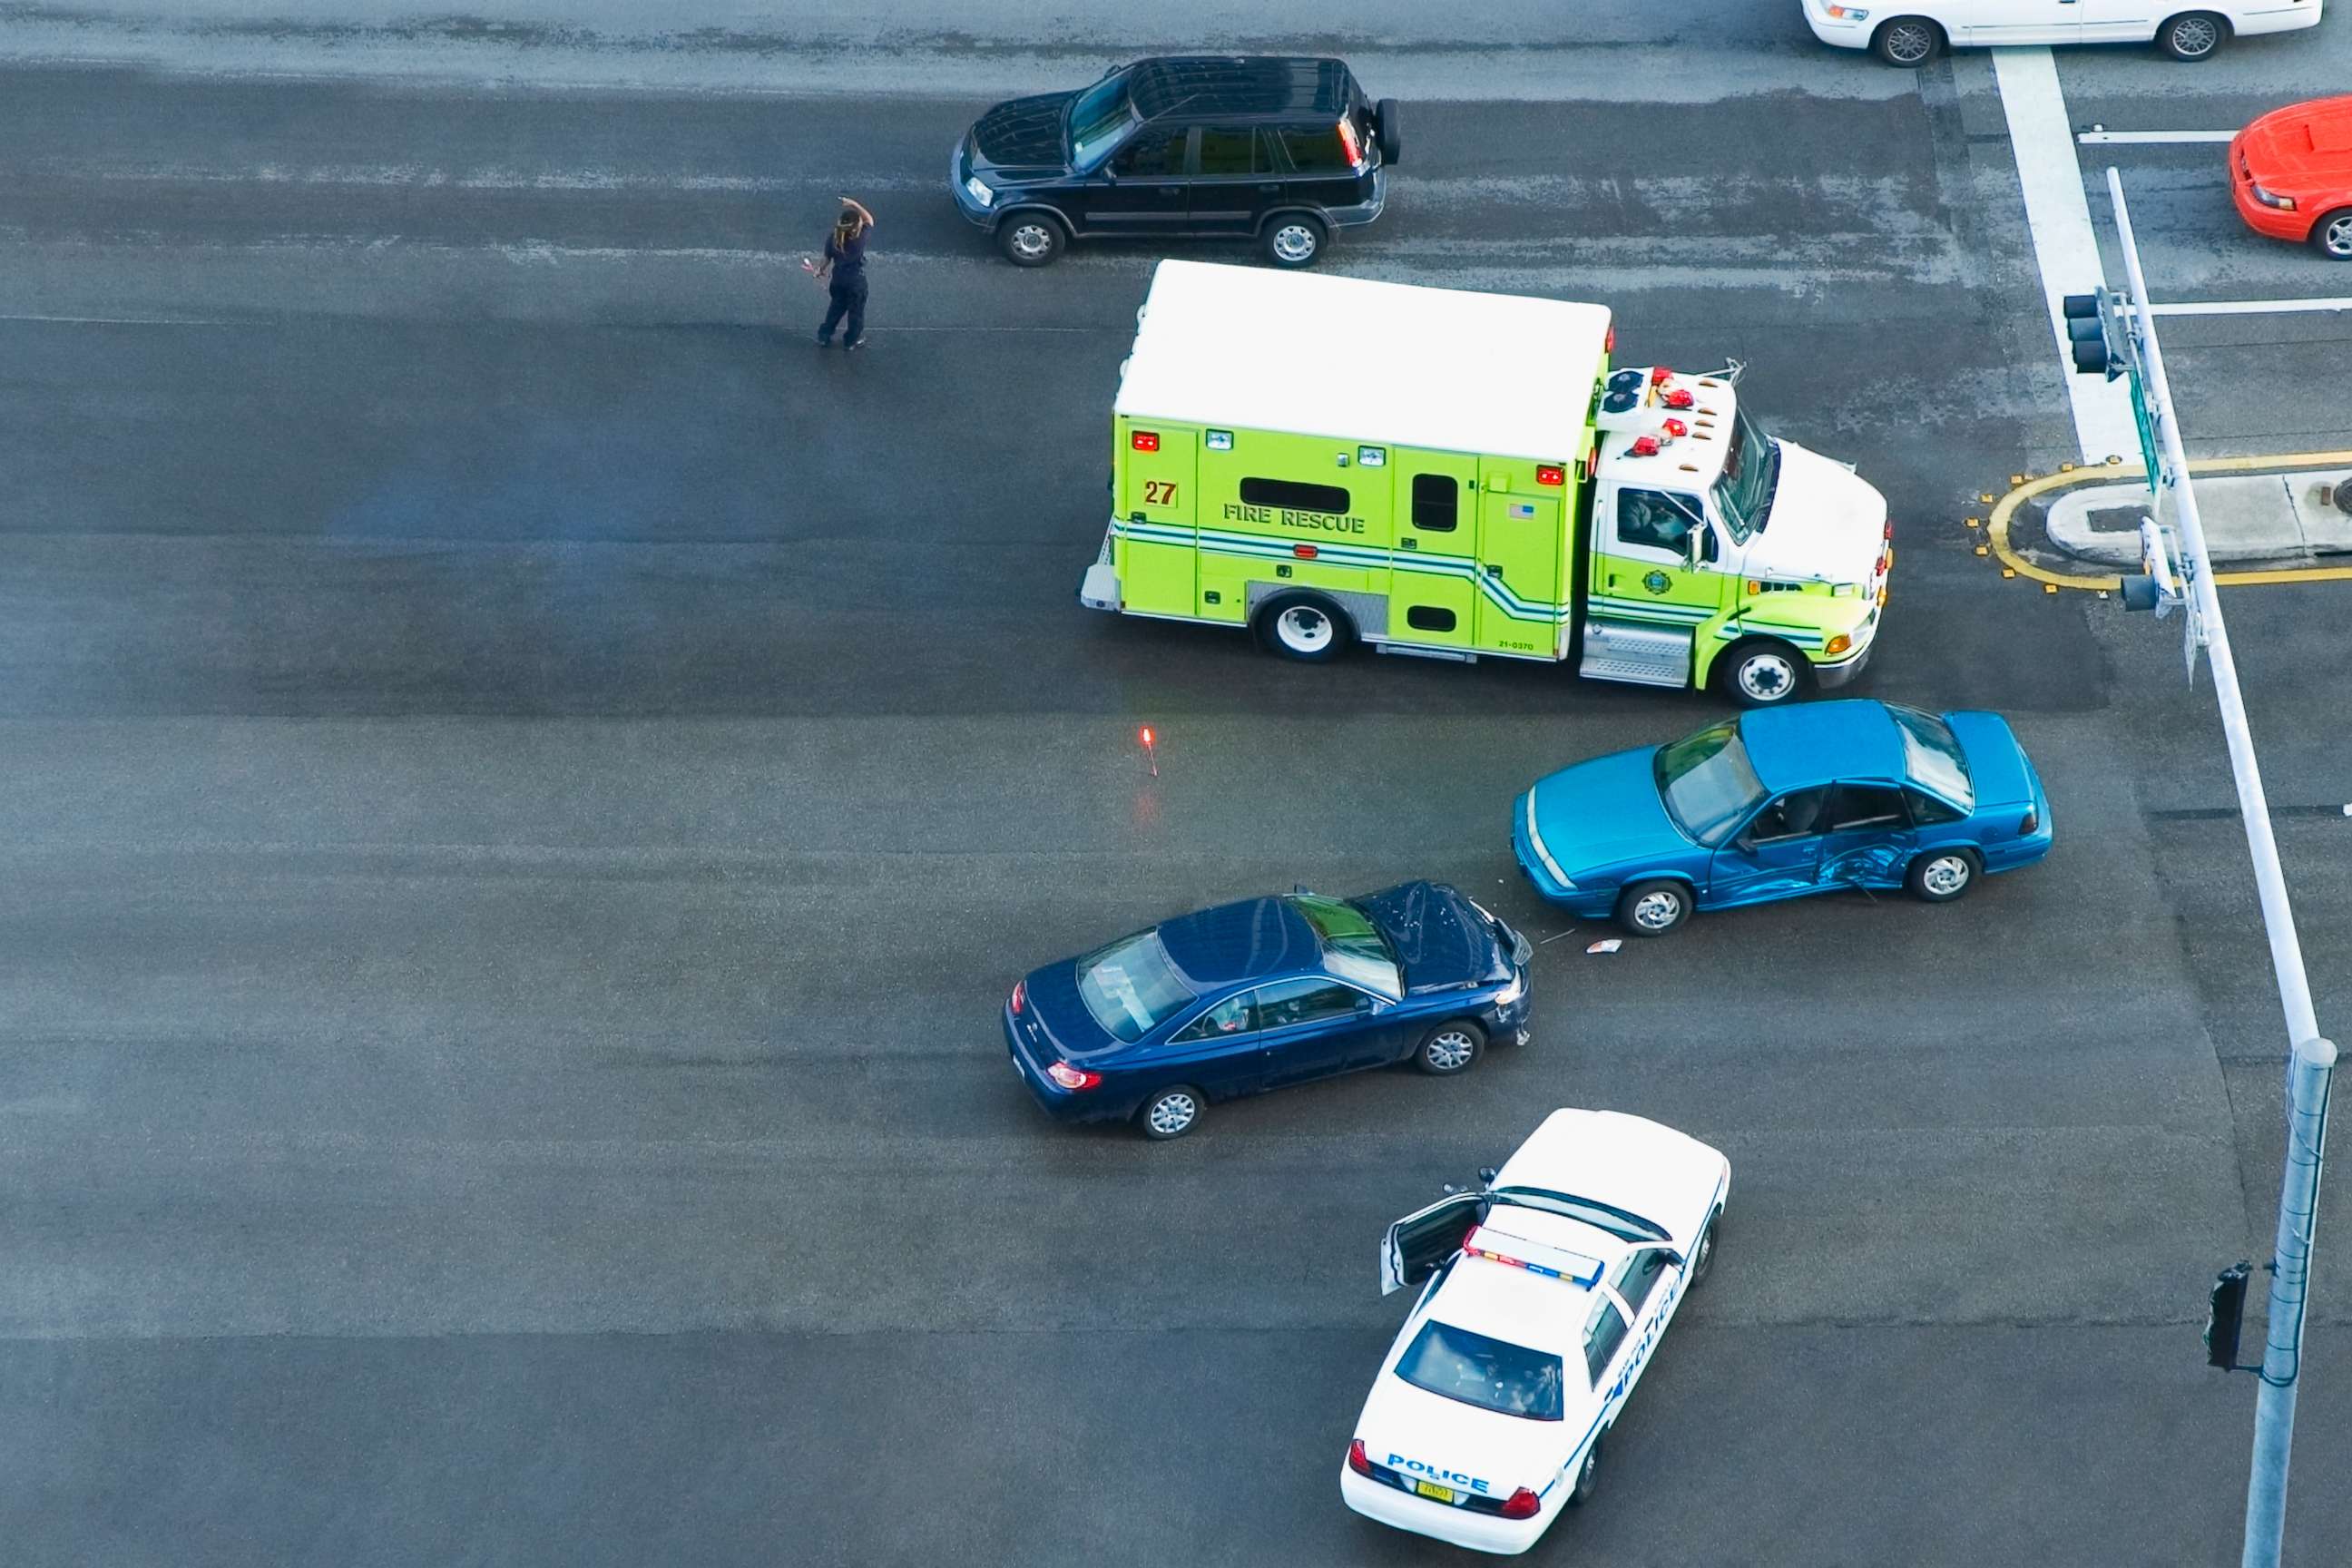 PHOTO: A car accident is pictured in an undated stock photo.